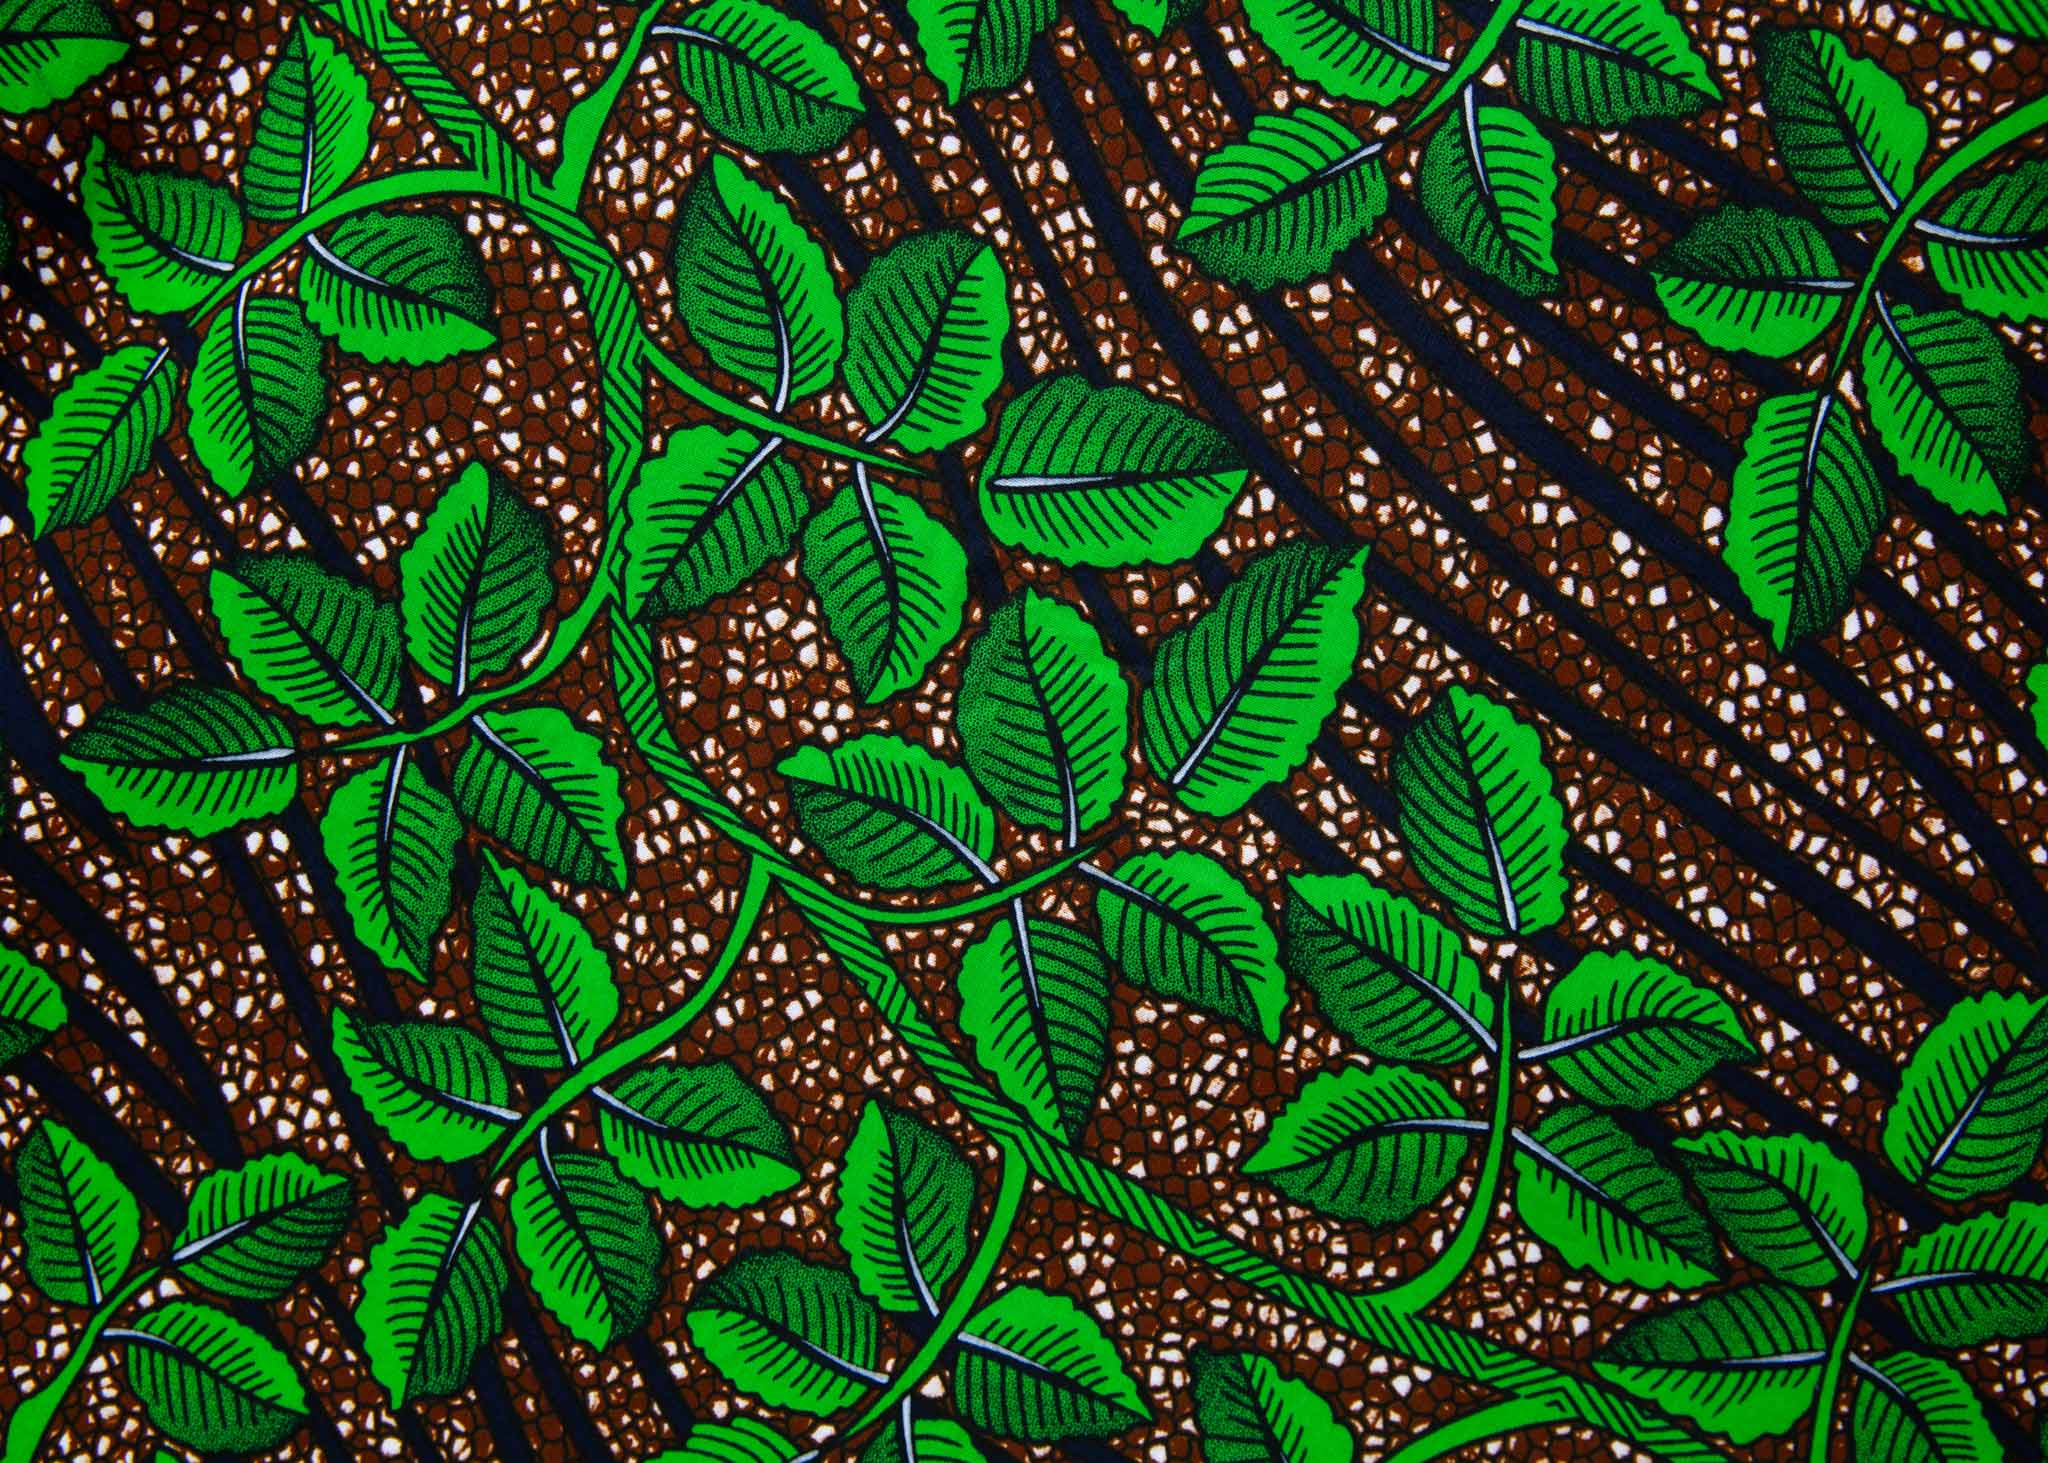 Display of brown dress with green vine print, fabric.